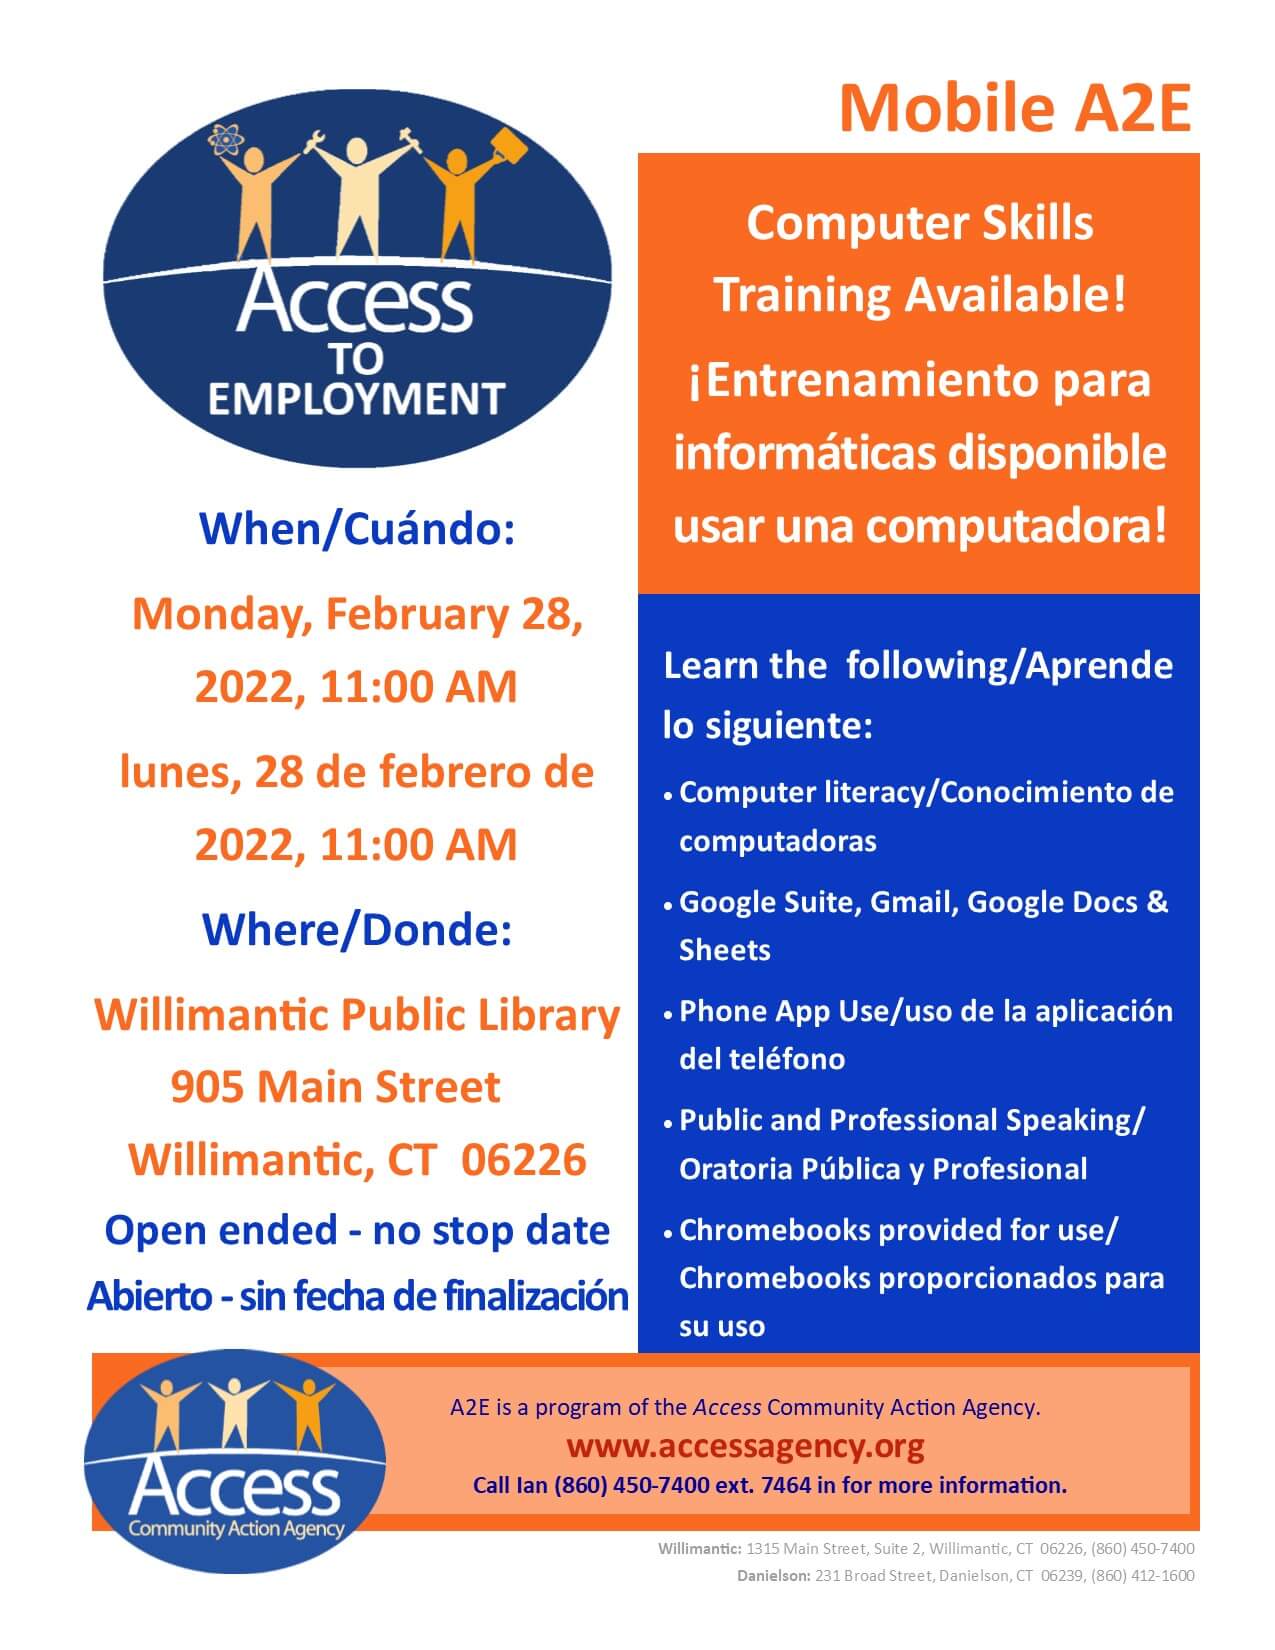 Mobile A2E at the Willimantic Library